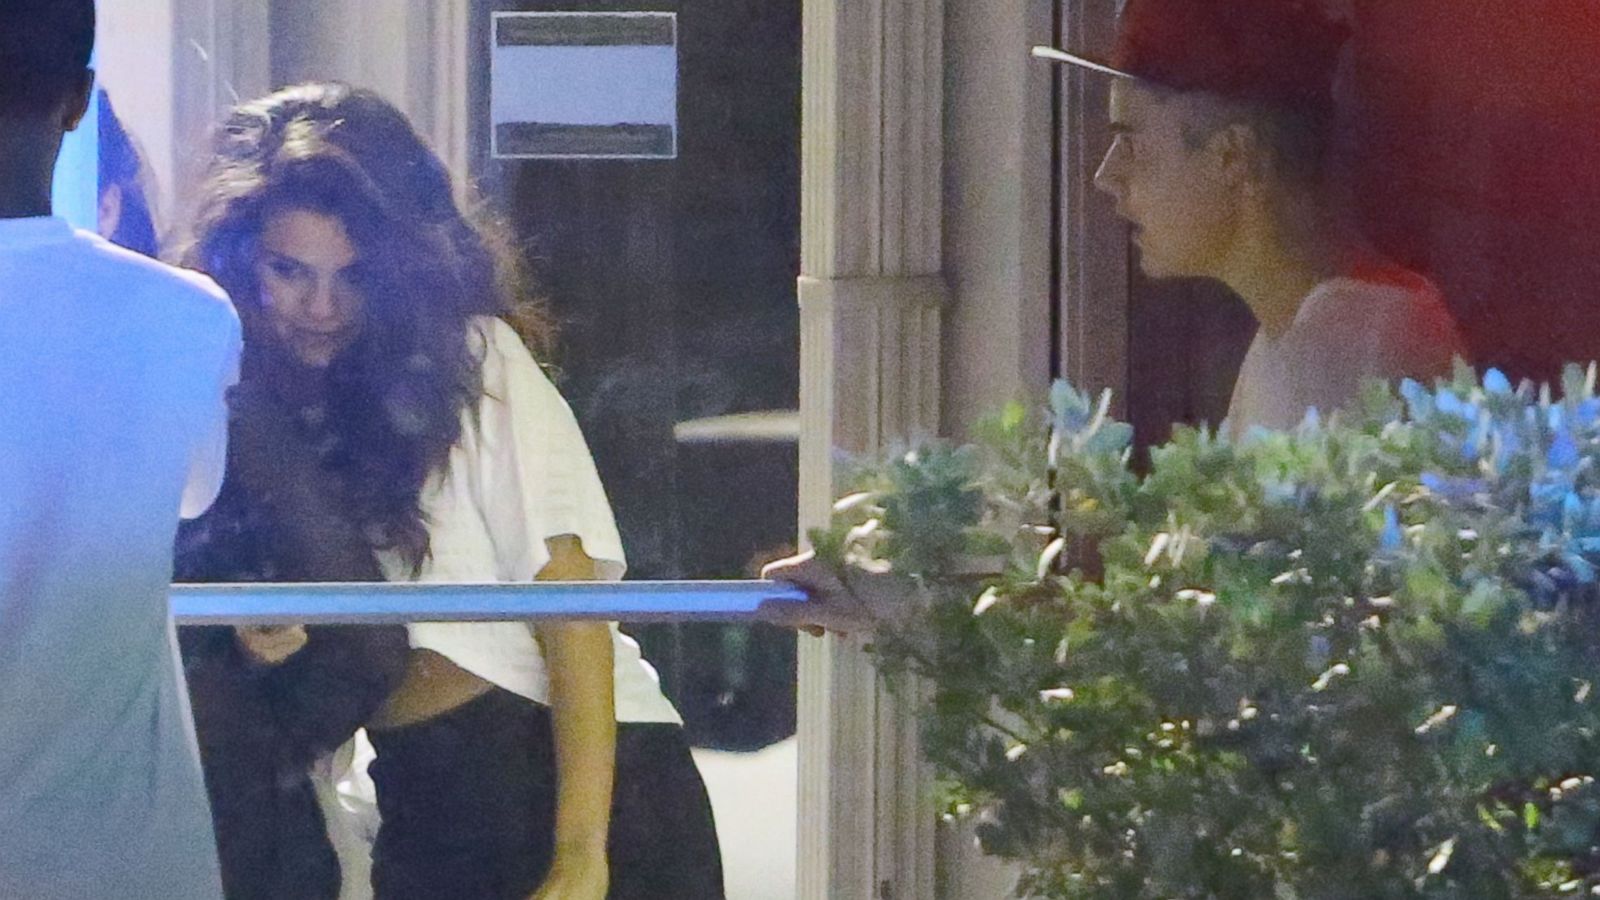 Justin Bieber and Selena Gomez's Relationship: A Look Back